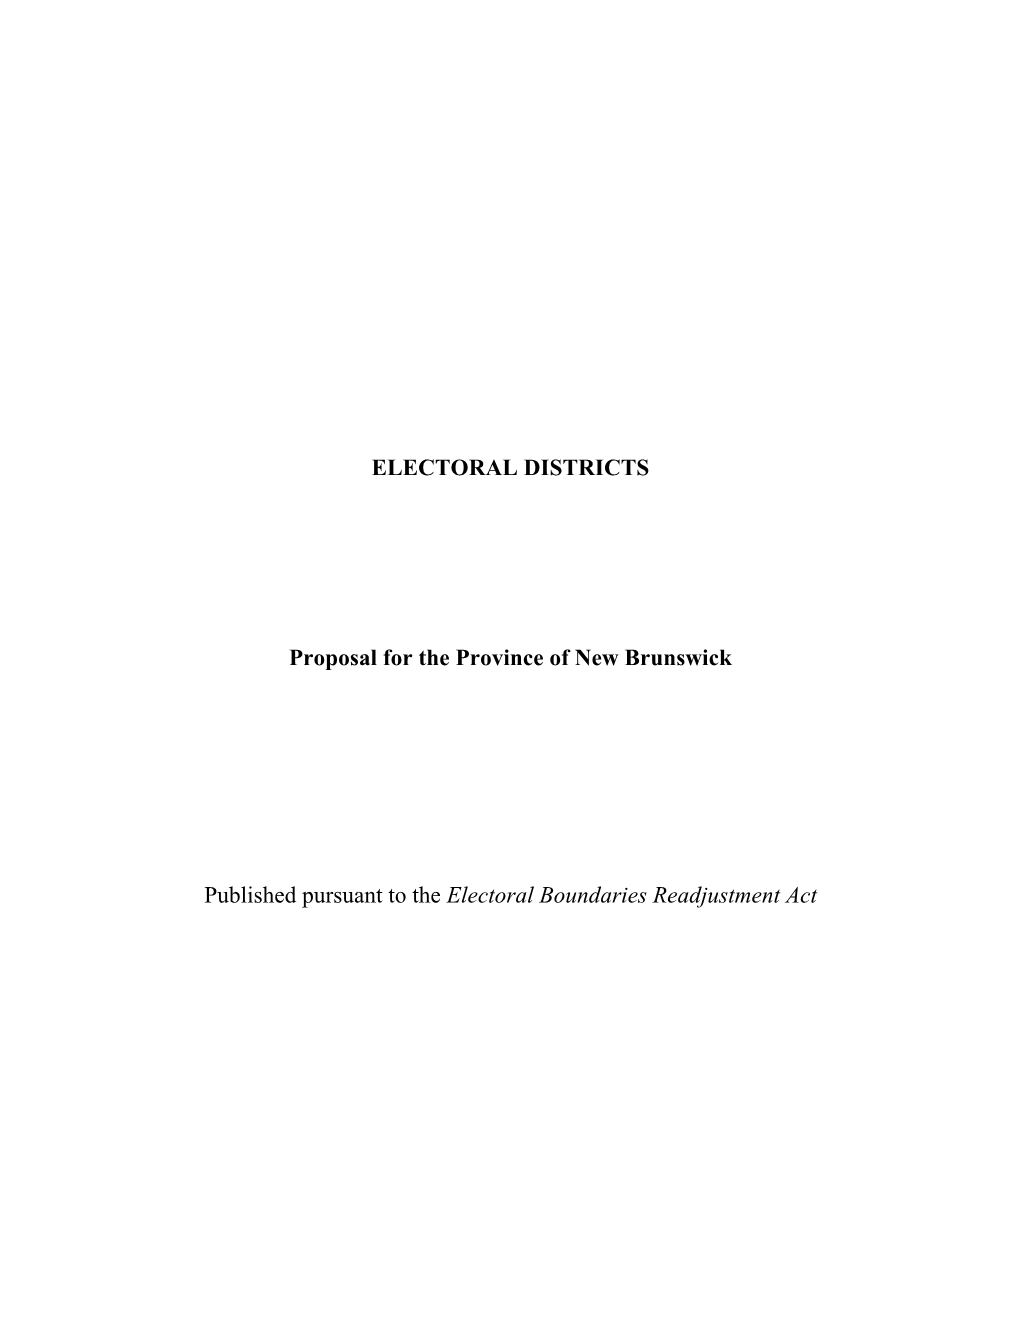 ELECTORAL DISTRICTS Proposal for the Province of New Brunswick Published Pursuant to the Electoral Boundaries Readjustment